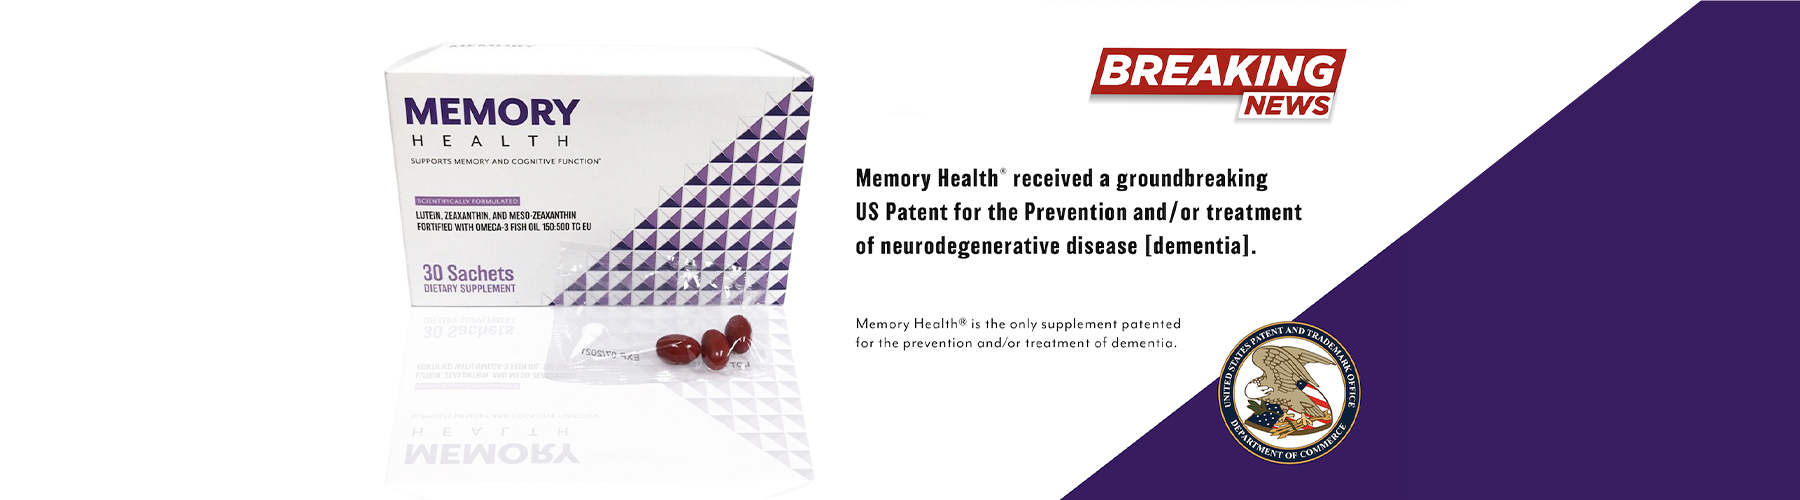 Memory Health® received a groundbreaking US Patent for the Prevention and/or treatment of neurodegenerative disease [dementia].